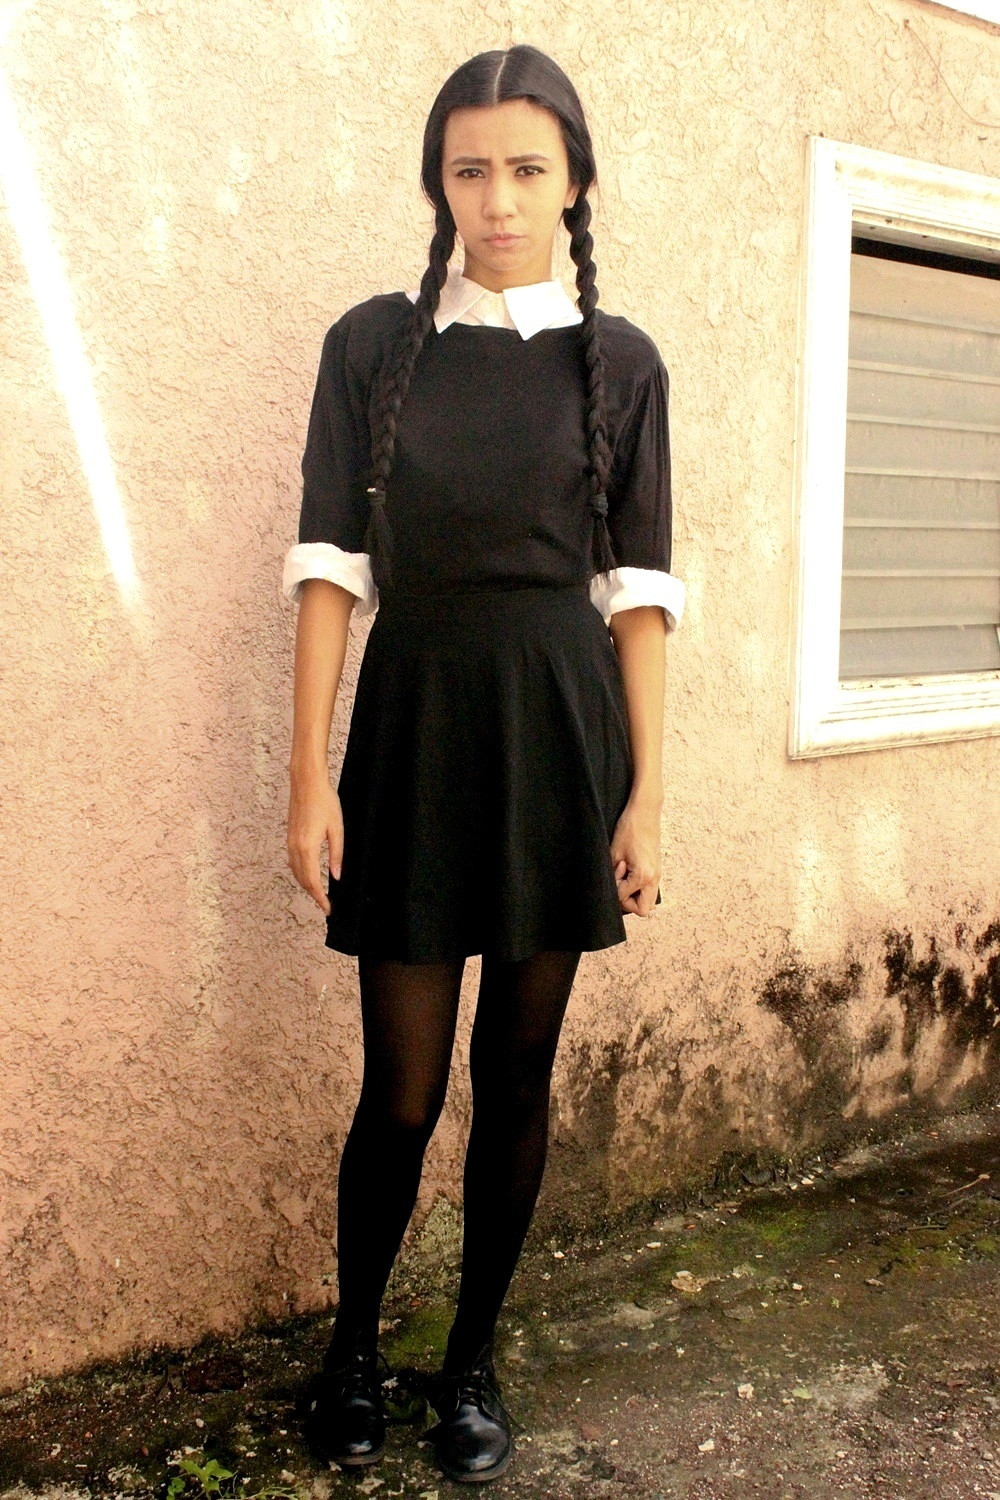 35 Of the Best Ideas for Wednesday Addams Costume Diy – Home, Family ...